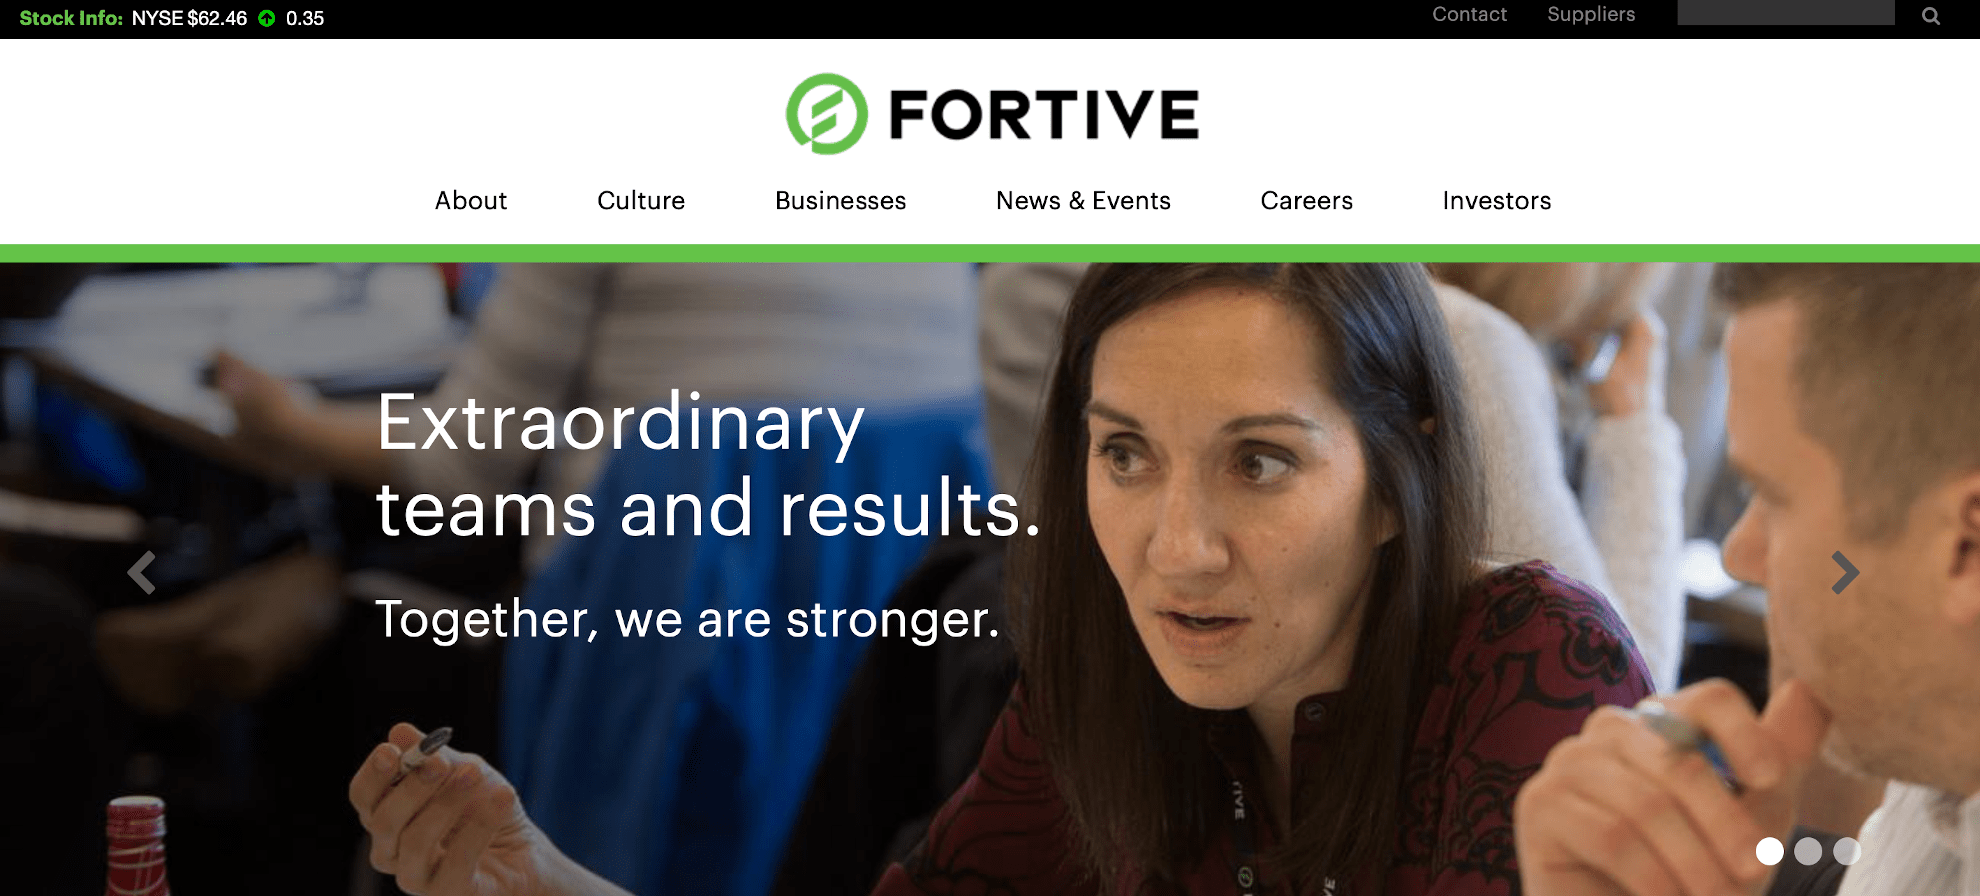 1 fortive stock info